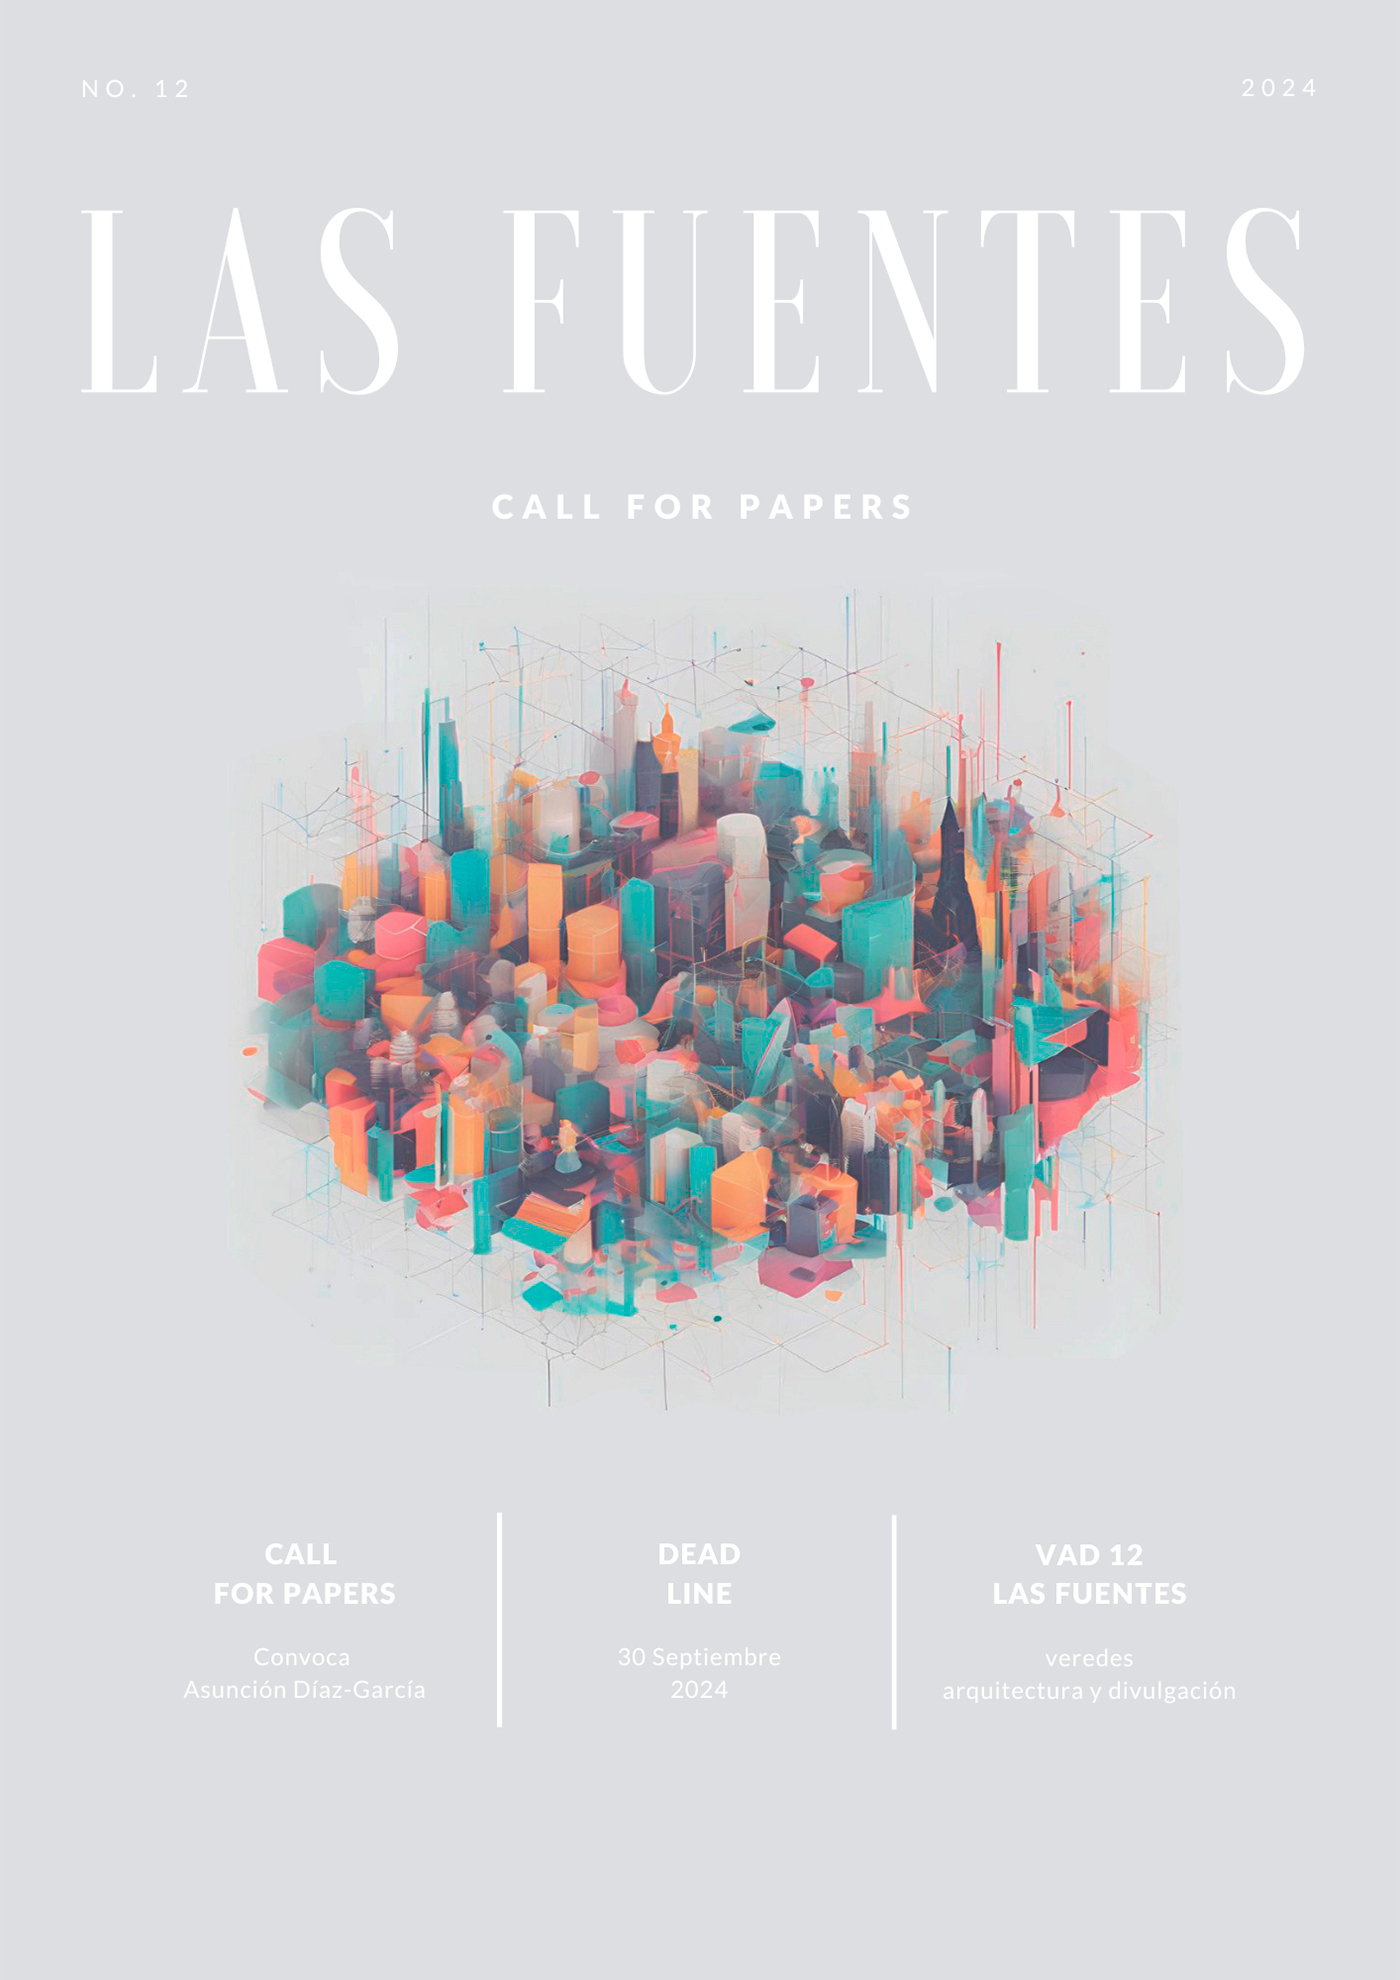 CFP Call for Papers. VAD 12. Las fuentes